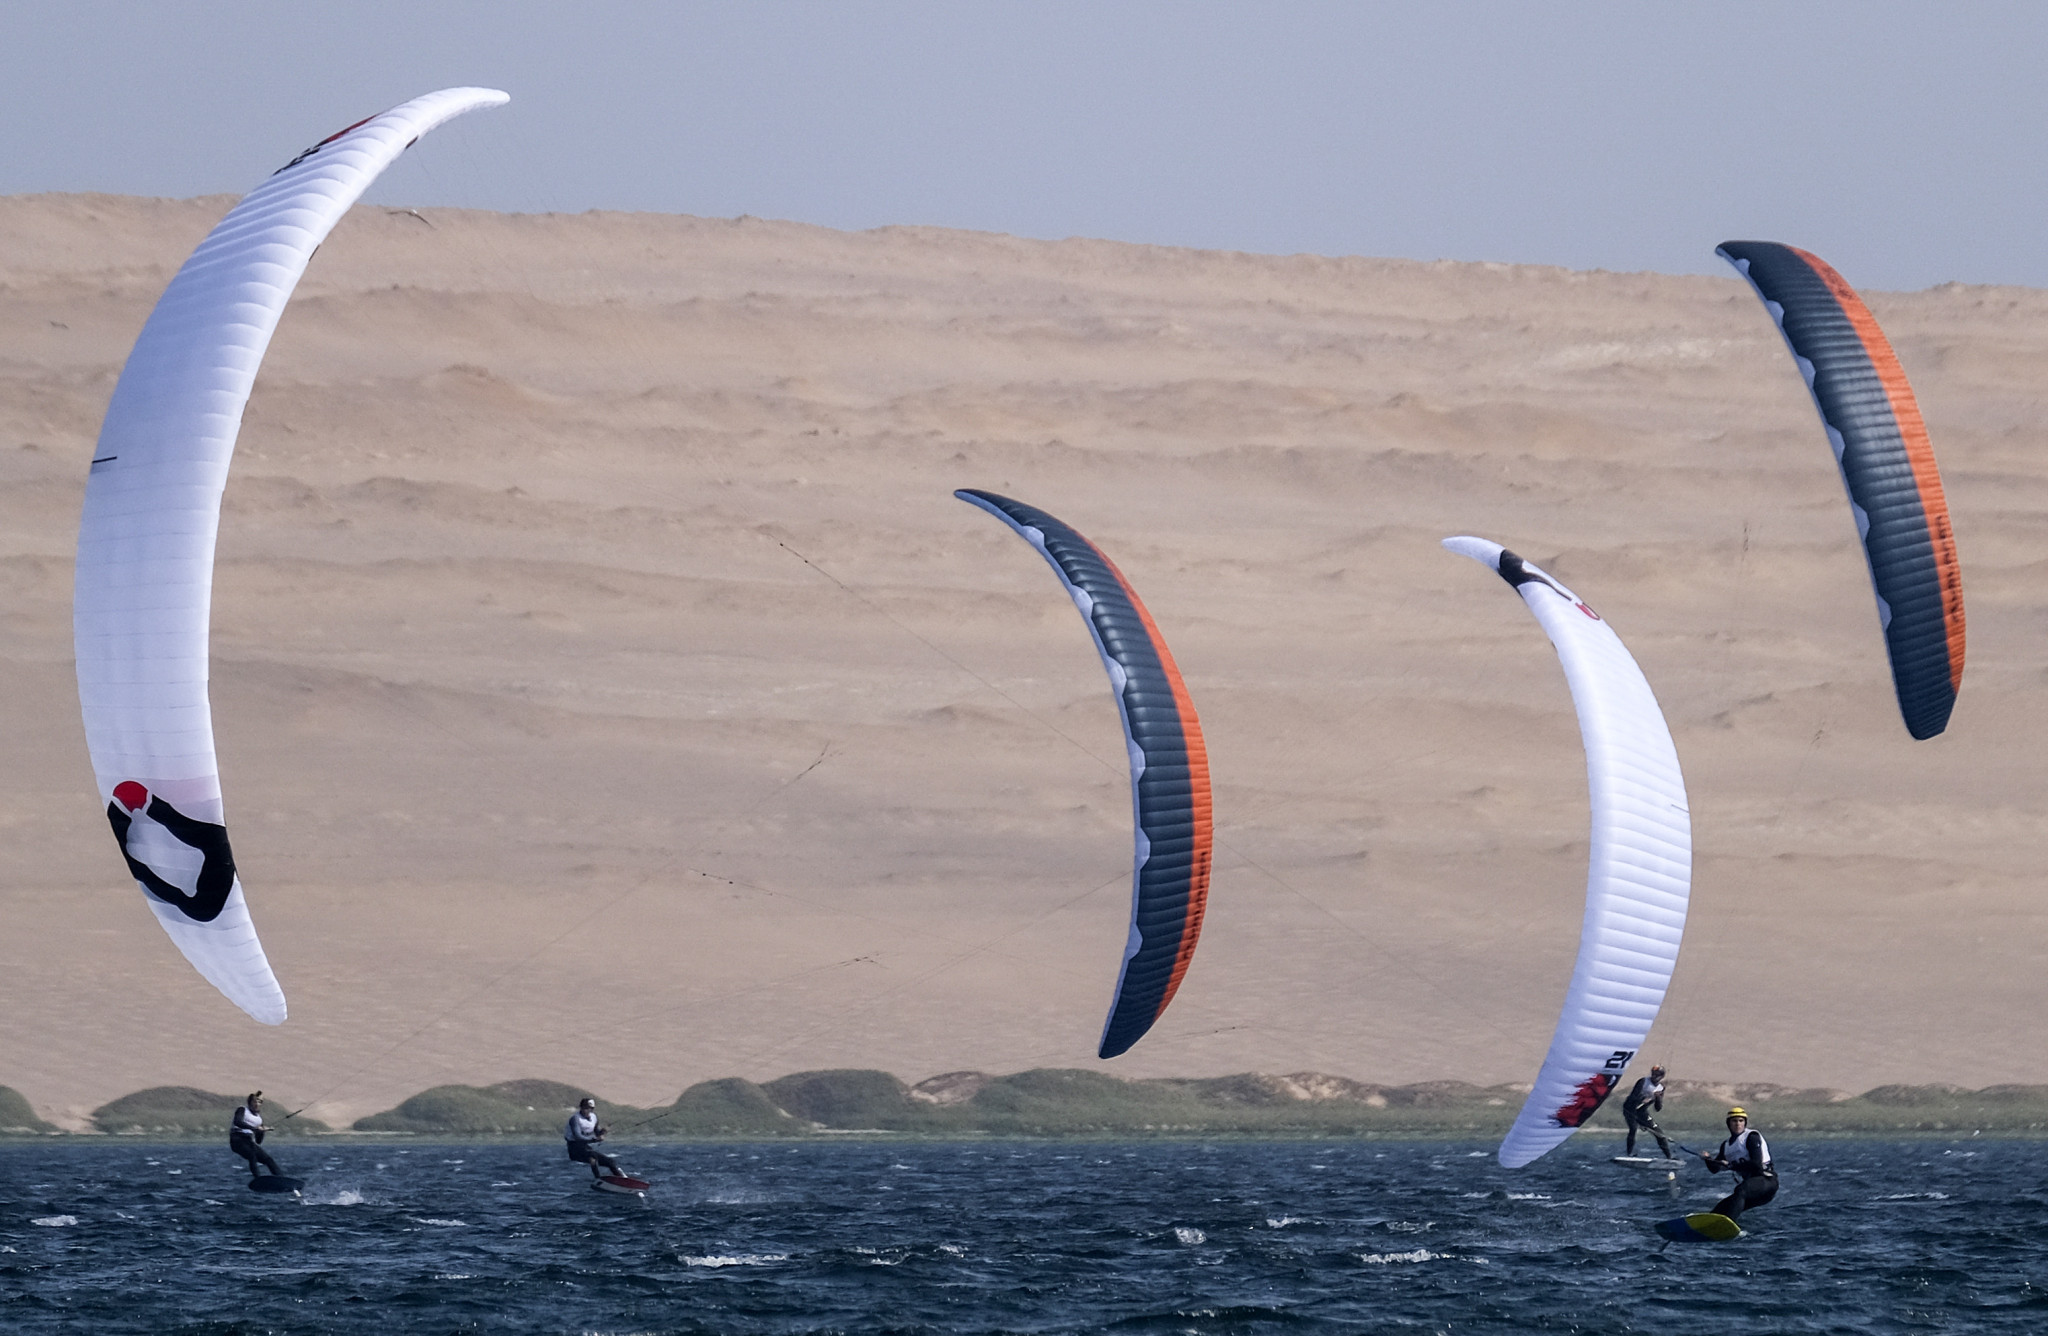 Sailing continued to take place, with competitors in the open windsurfing taking to the water ©Lima 2019